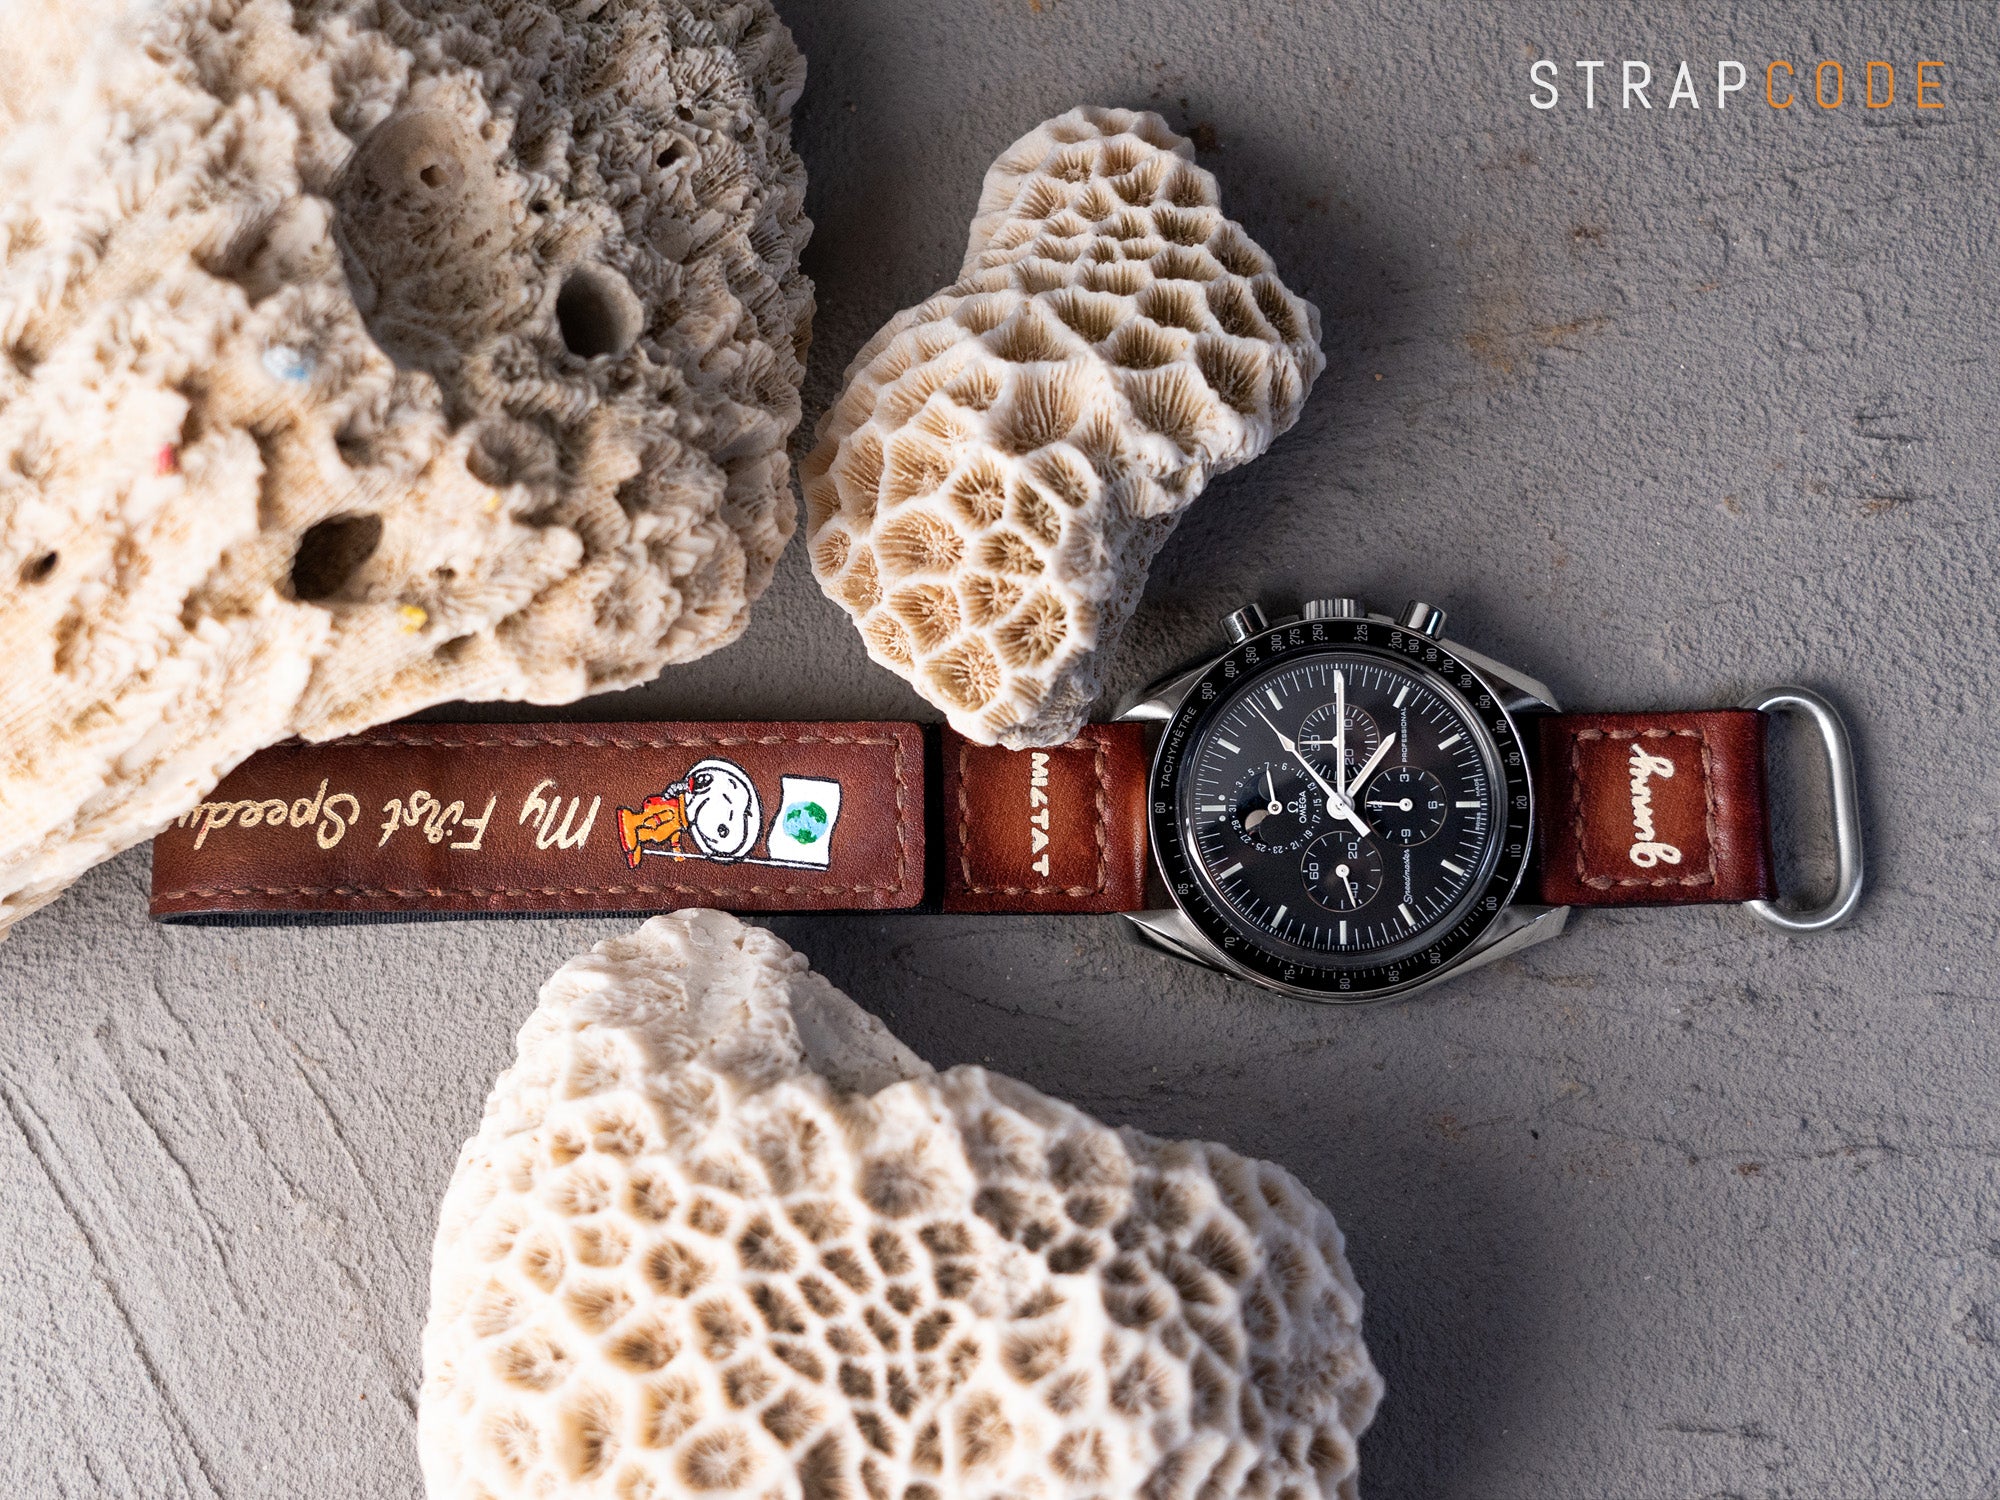 The chunky Leather/loop SNOOPY watch band by Strapcode, design of the Omega Speedmaster Professional Moonphase